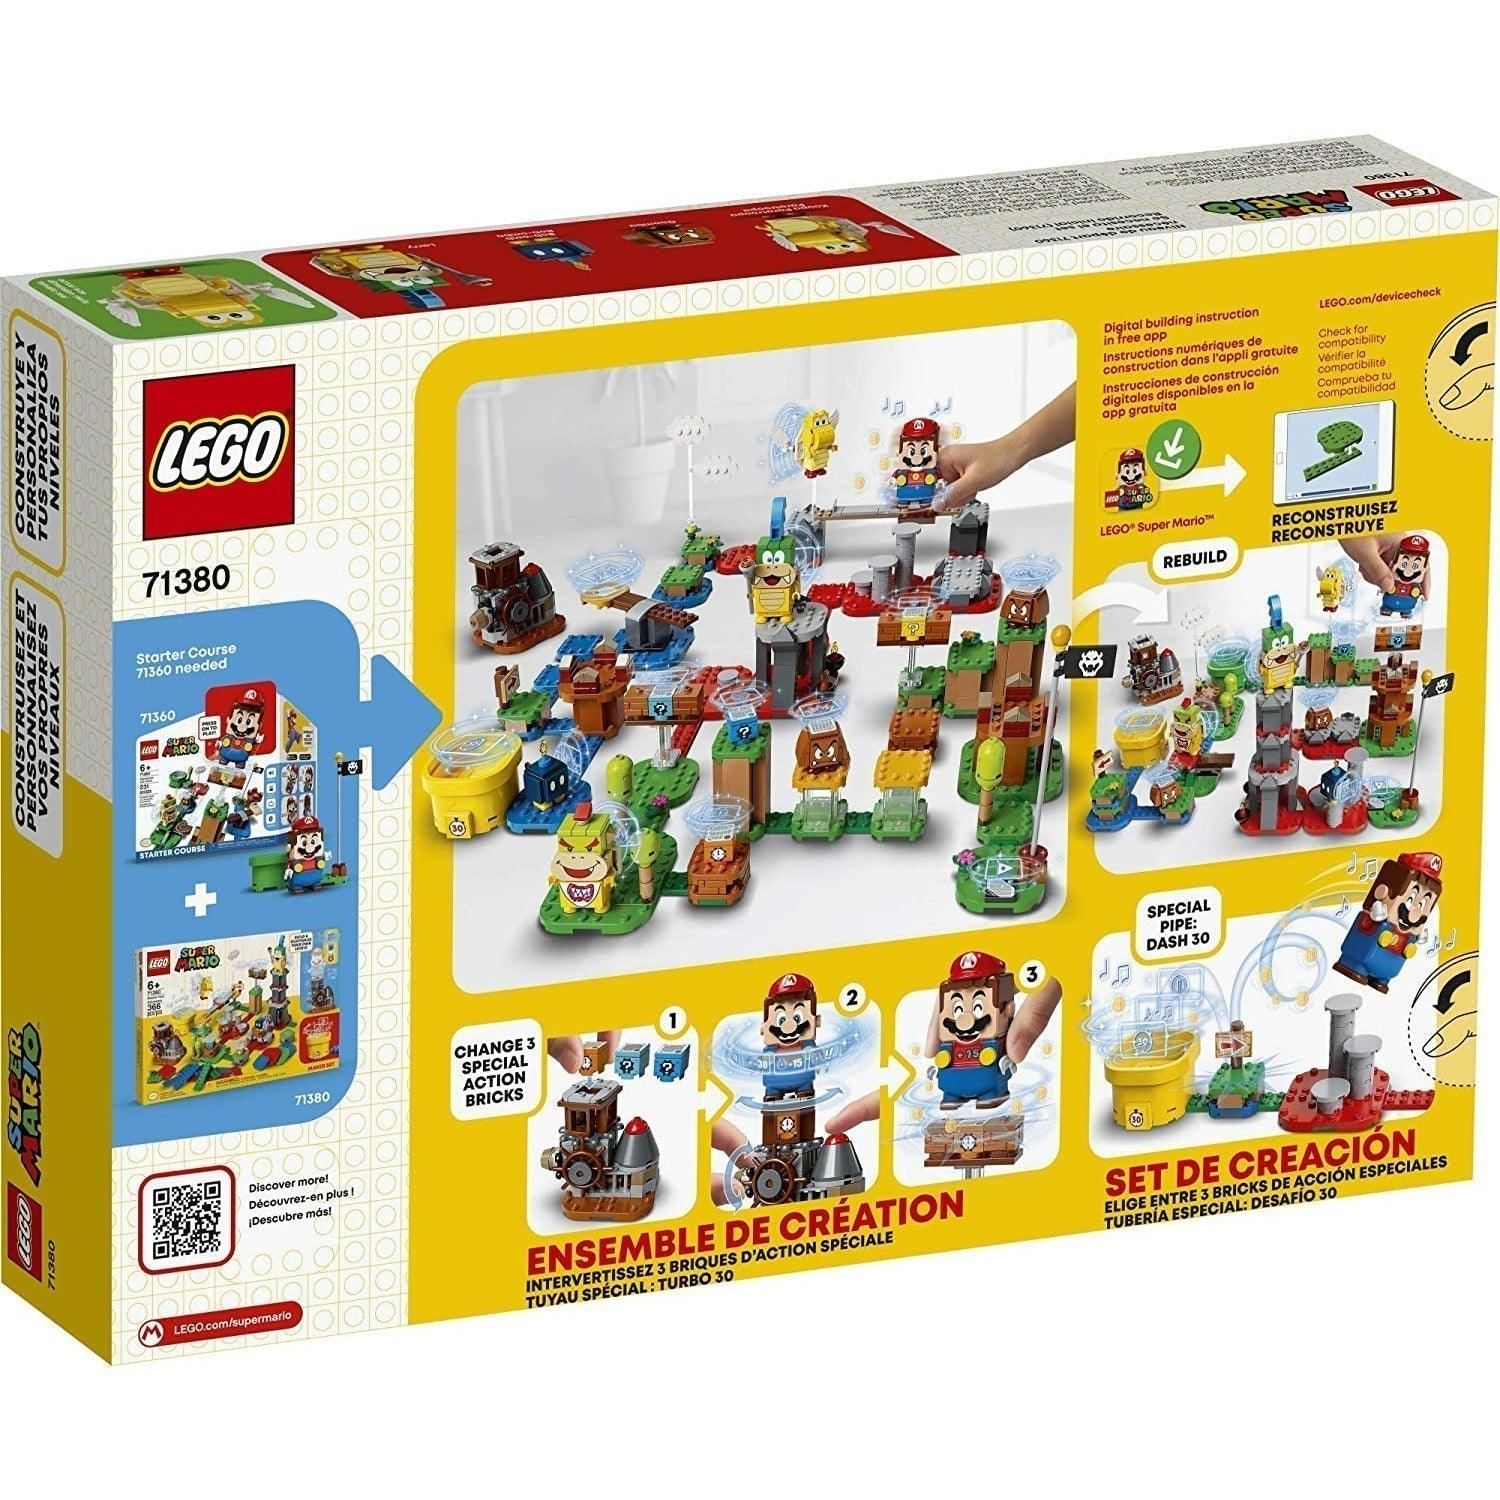 LEGO Super Mario Master Your Adventure Maker Set 71380 Building Kit; Collectible Gift Toy Playset for Creative Kids, New 2021 (366 Pieces) - BumbleToys - 6+ Years, Boys, Girls, LEGO, OXE, Pre-Order, Super Mario